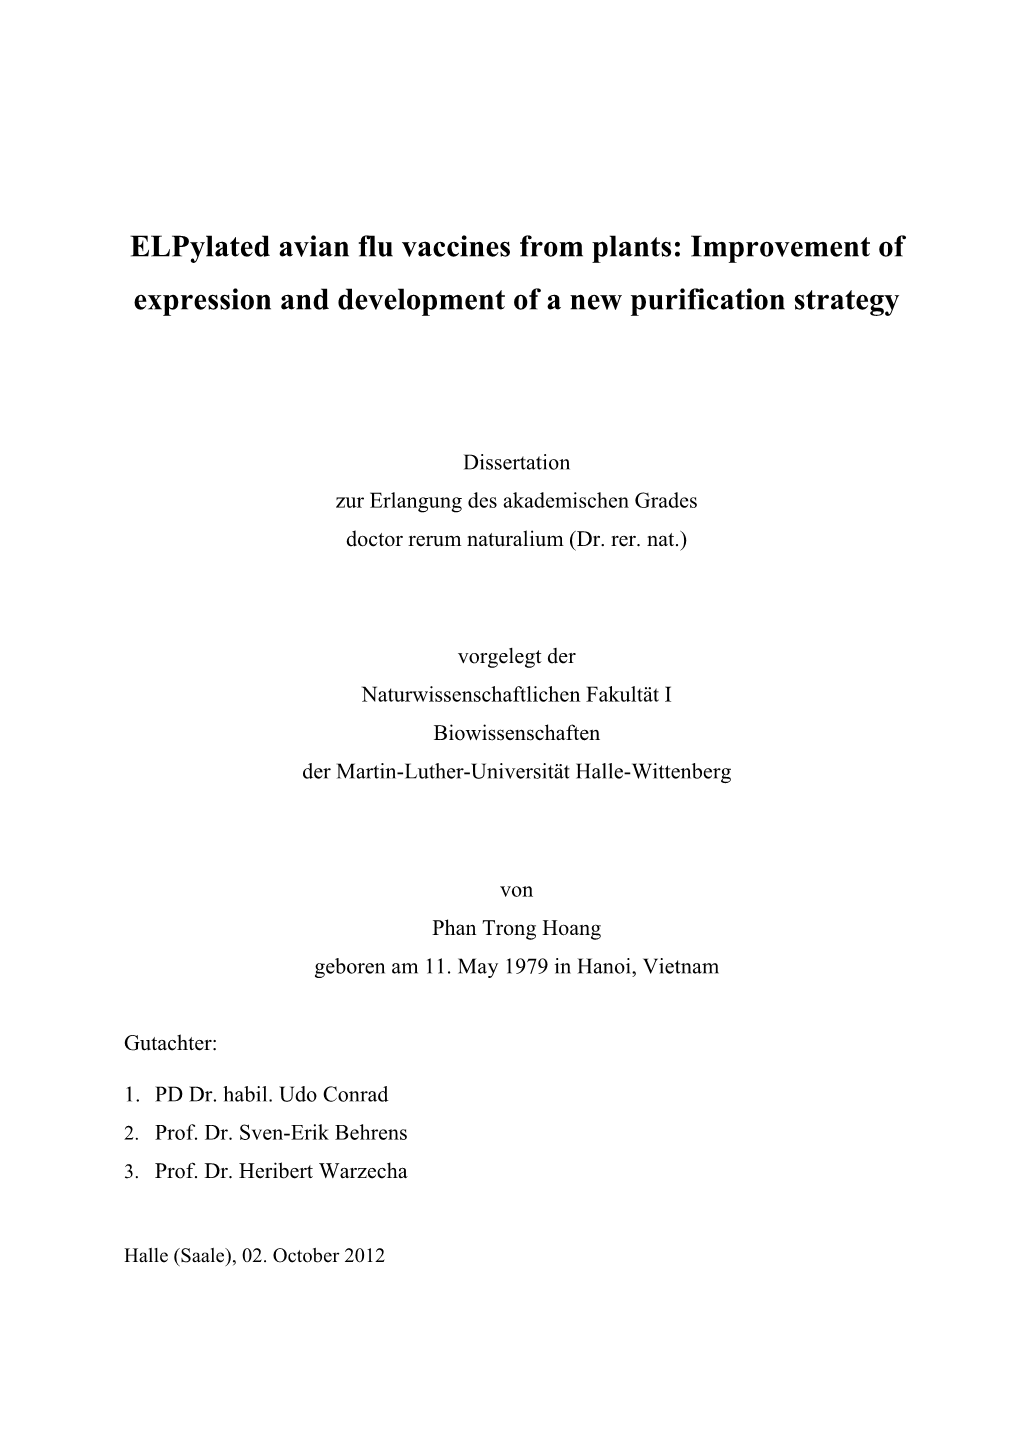 Elpylated Avian Flu Vaccines: Improvement of Expression And